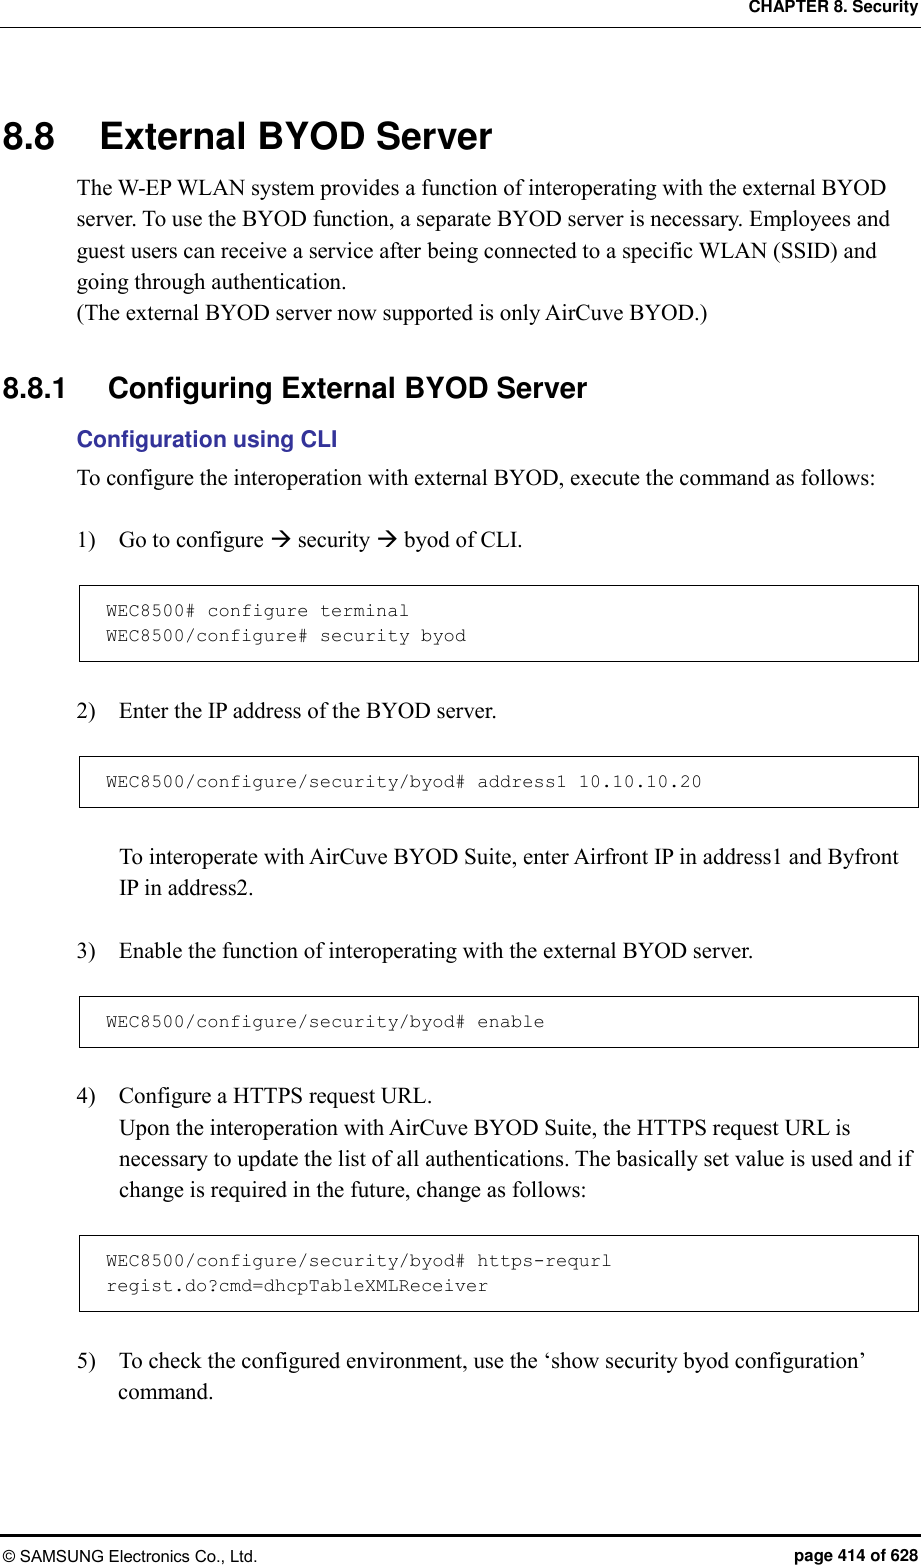 CHAPTER 8. Security © SAMSUNG Electronics Co., Ltd.  page 414 of 628 8.8  External BYOD Server The W-EP WLAN system provides a function of interoperating with the external BYOD server. To use the BYOD function, a separate BYOD server is necessary. Employees and guest users can receive a service after being connected to a specific WLAN (SSID) and going through authentication. (The external BYOD server now supported is only AirCuve BYOD.)  8.8.1  Configuring External BYOD Server Configuration using CLI To configure the interoperation with external BYOD, execute the command as follows:  1)    Go to configure  security  byod of CLI.  WEC8500# configure terminal WEC8500/configure# security byod  2)    Enter the IP address of the BYOD server.  WEC8500/configure/security/byod# address1 10.10.10.20  To interoperate with AirCuve BYOD Suite, enter Airfront IP in address1 and Byfront IP in address2.  3)    Enable the function of interoperating with the external BYOD server.  WEC8500/configure/security/byod# enable  4)    Configure a HTTPS request URL. Upon the interoperation with AirCuve BYOD Suite, the HTTPS request URL is necessary to update the list of all authentications. The basically set value is used and if change is required in the future, change as follows:    WEC8500/configure/security/byod# https-requrl regist.do?cmd=dhcpTableXMLReceiver  5)    To check the configured environment, use the ‘show security byod configuration’ command.  